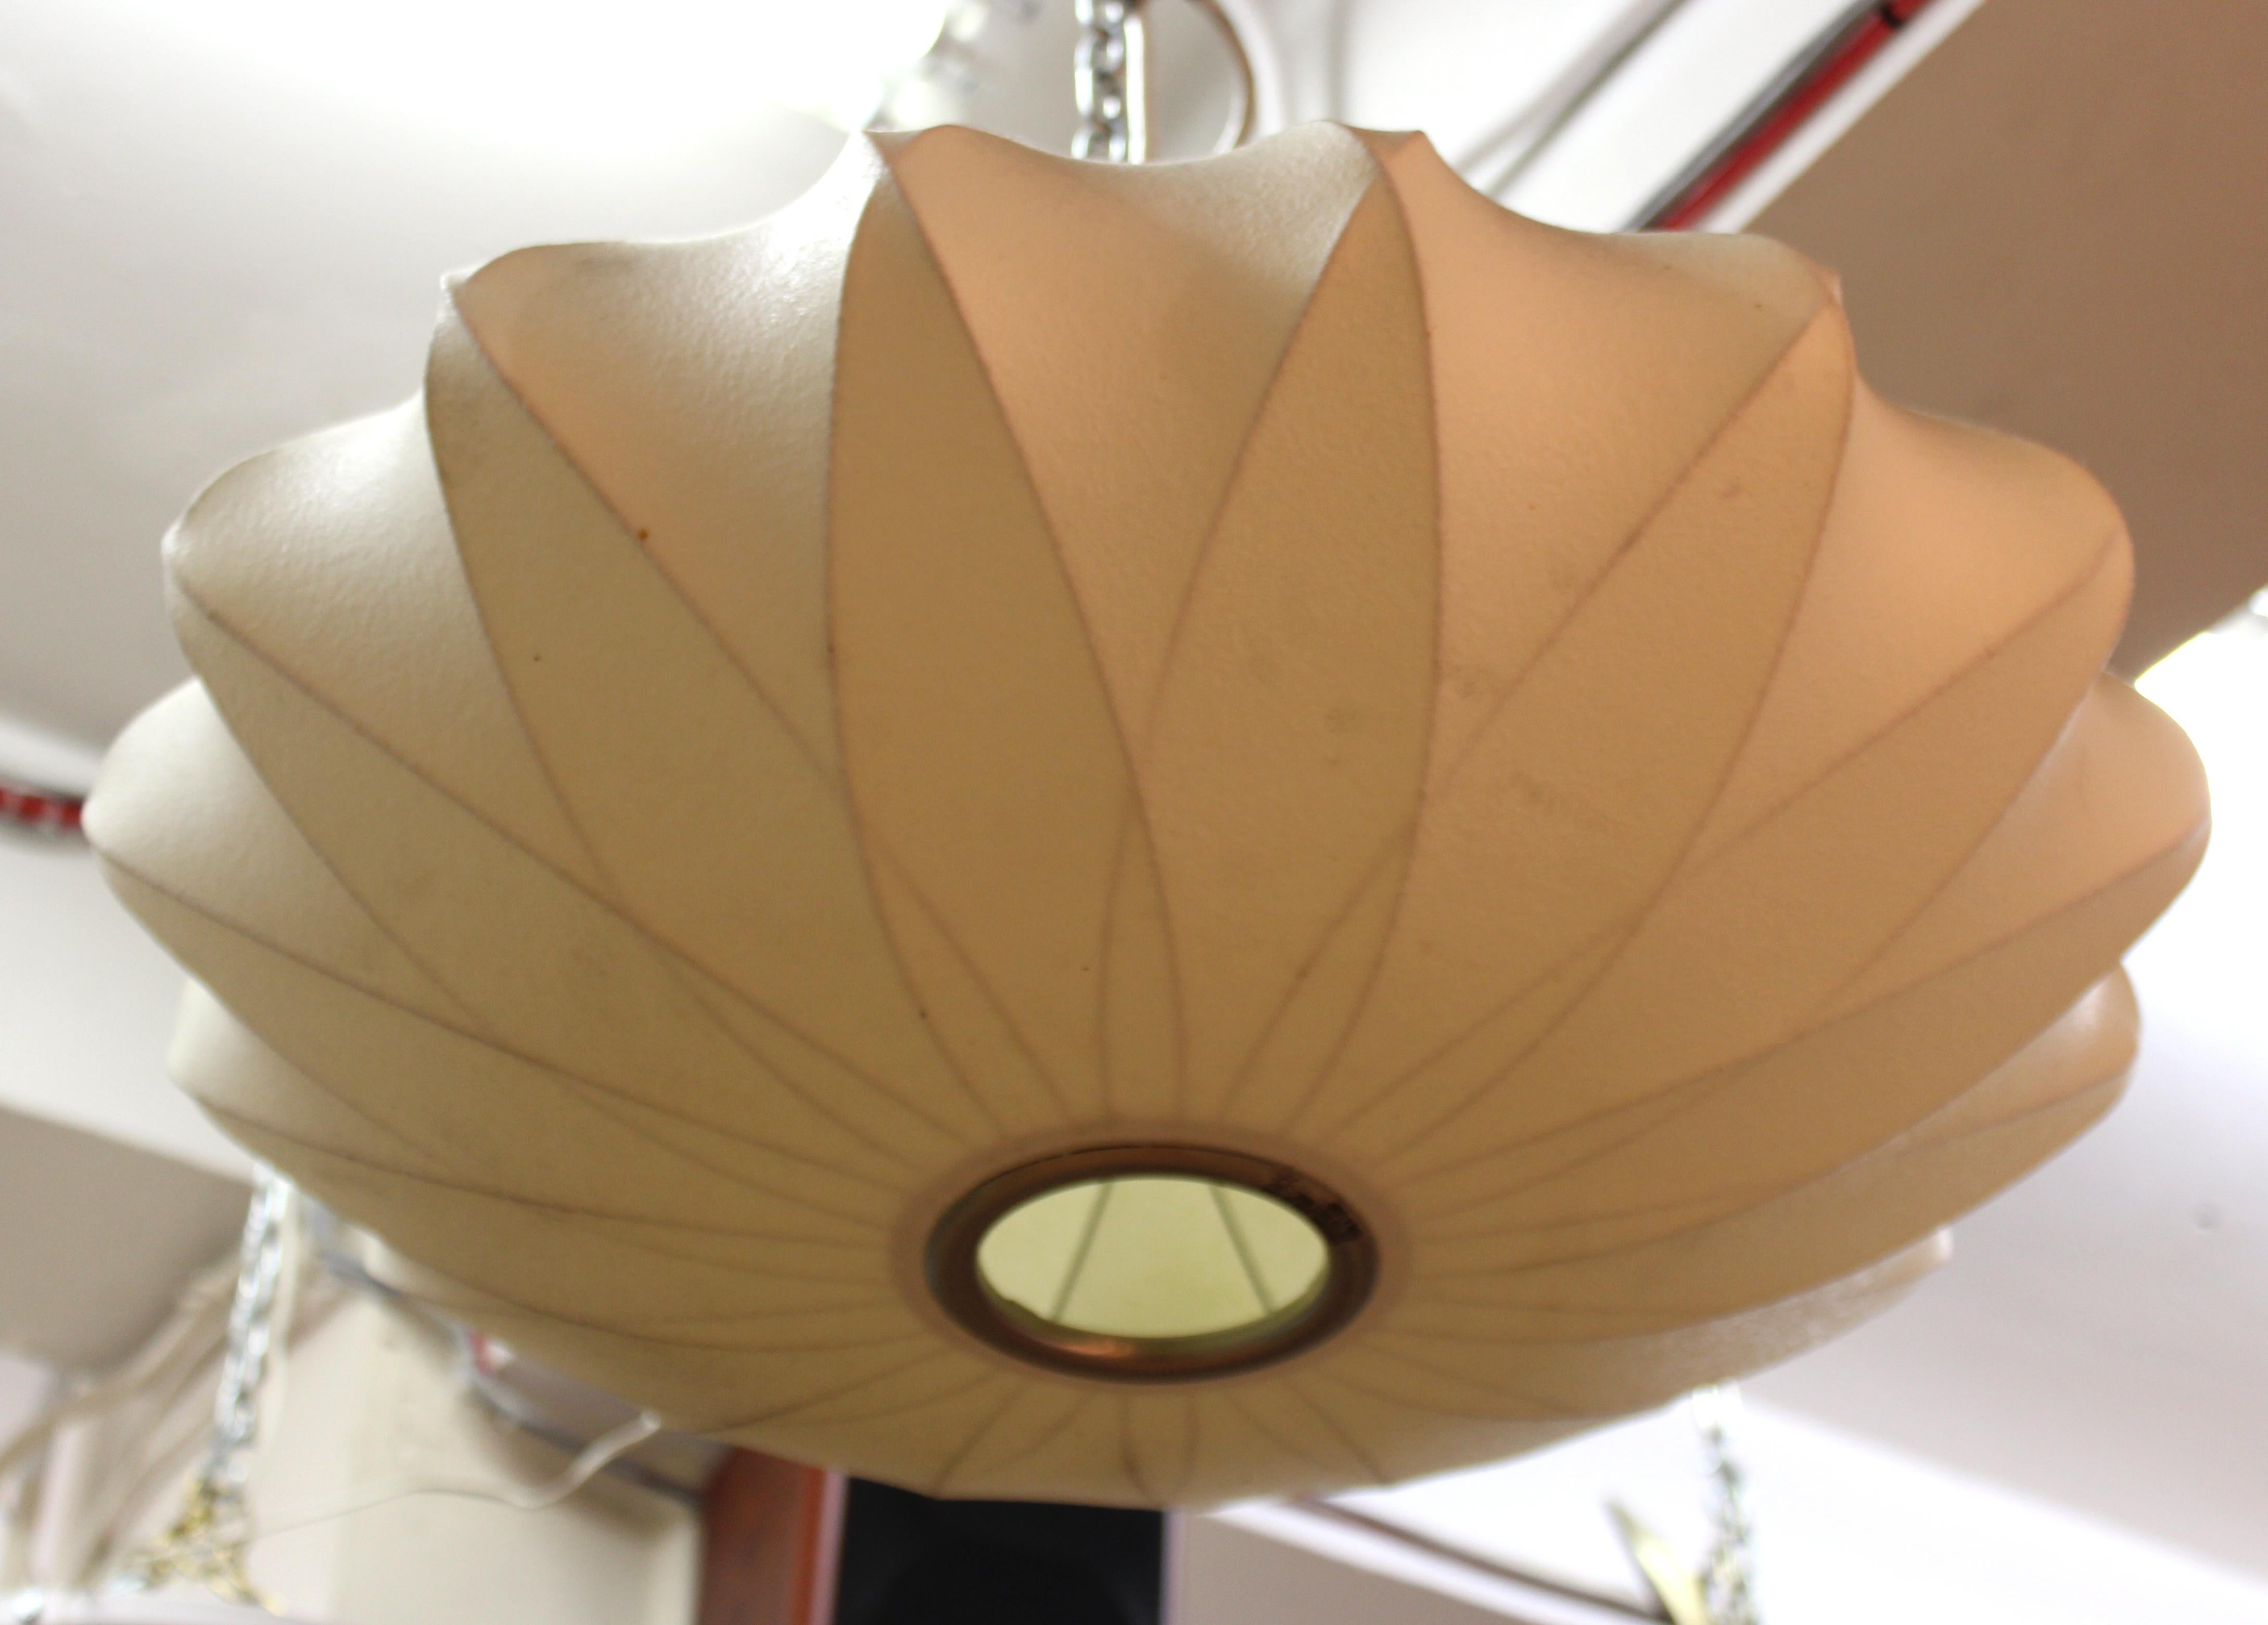 Mid-Century Modern cocoon ceiling pendant light designed by George Nelson. The piece was made in the 1960's and has a resin cover. In great vintage condition with age-appropriate wear and use.